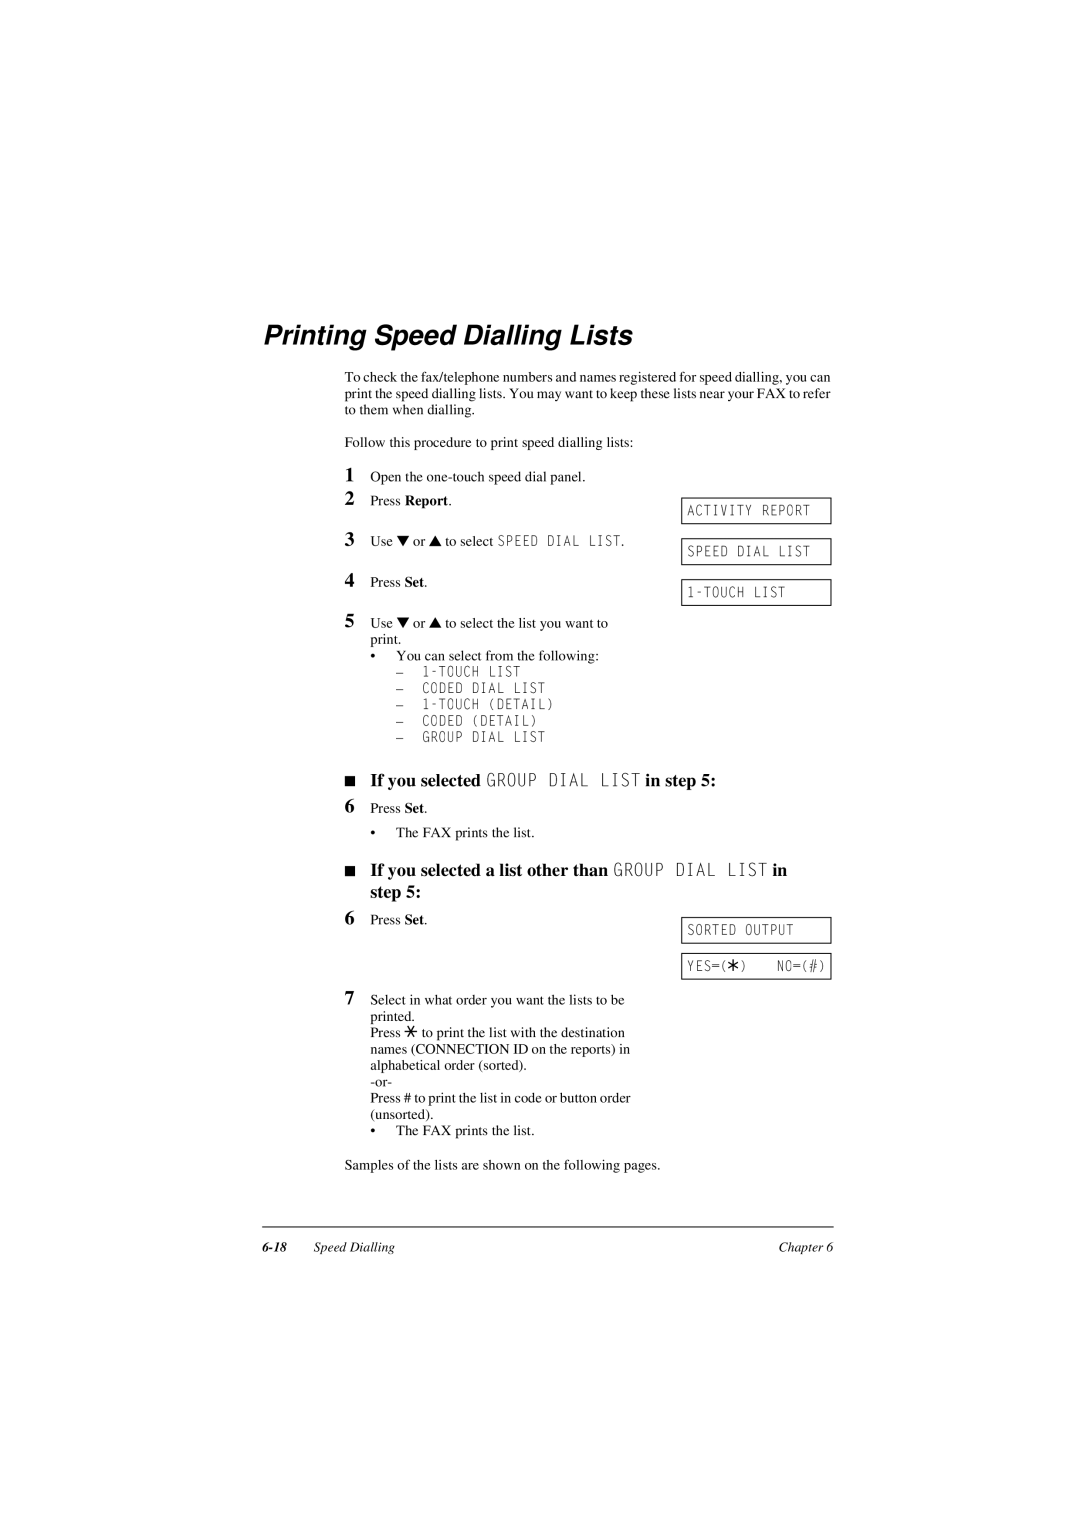 Canon L290, L240 manual Printing Speed Dialling Lists, Coded, Groupdiallist, Touchdetailail 